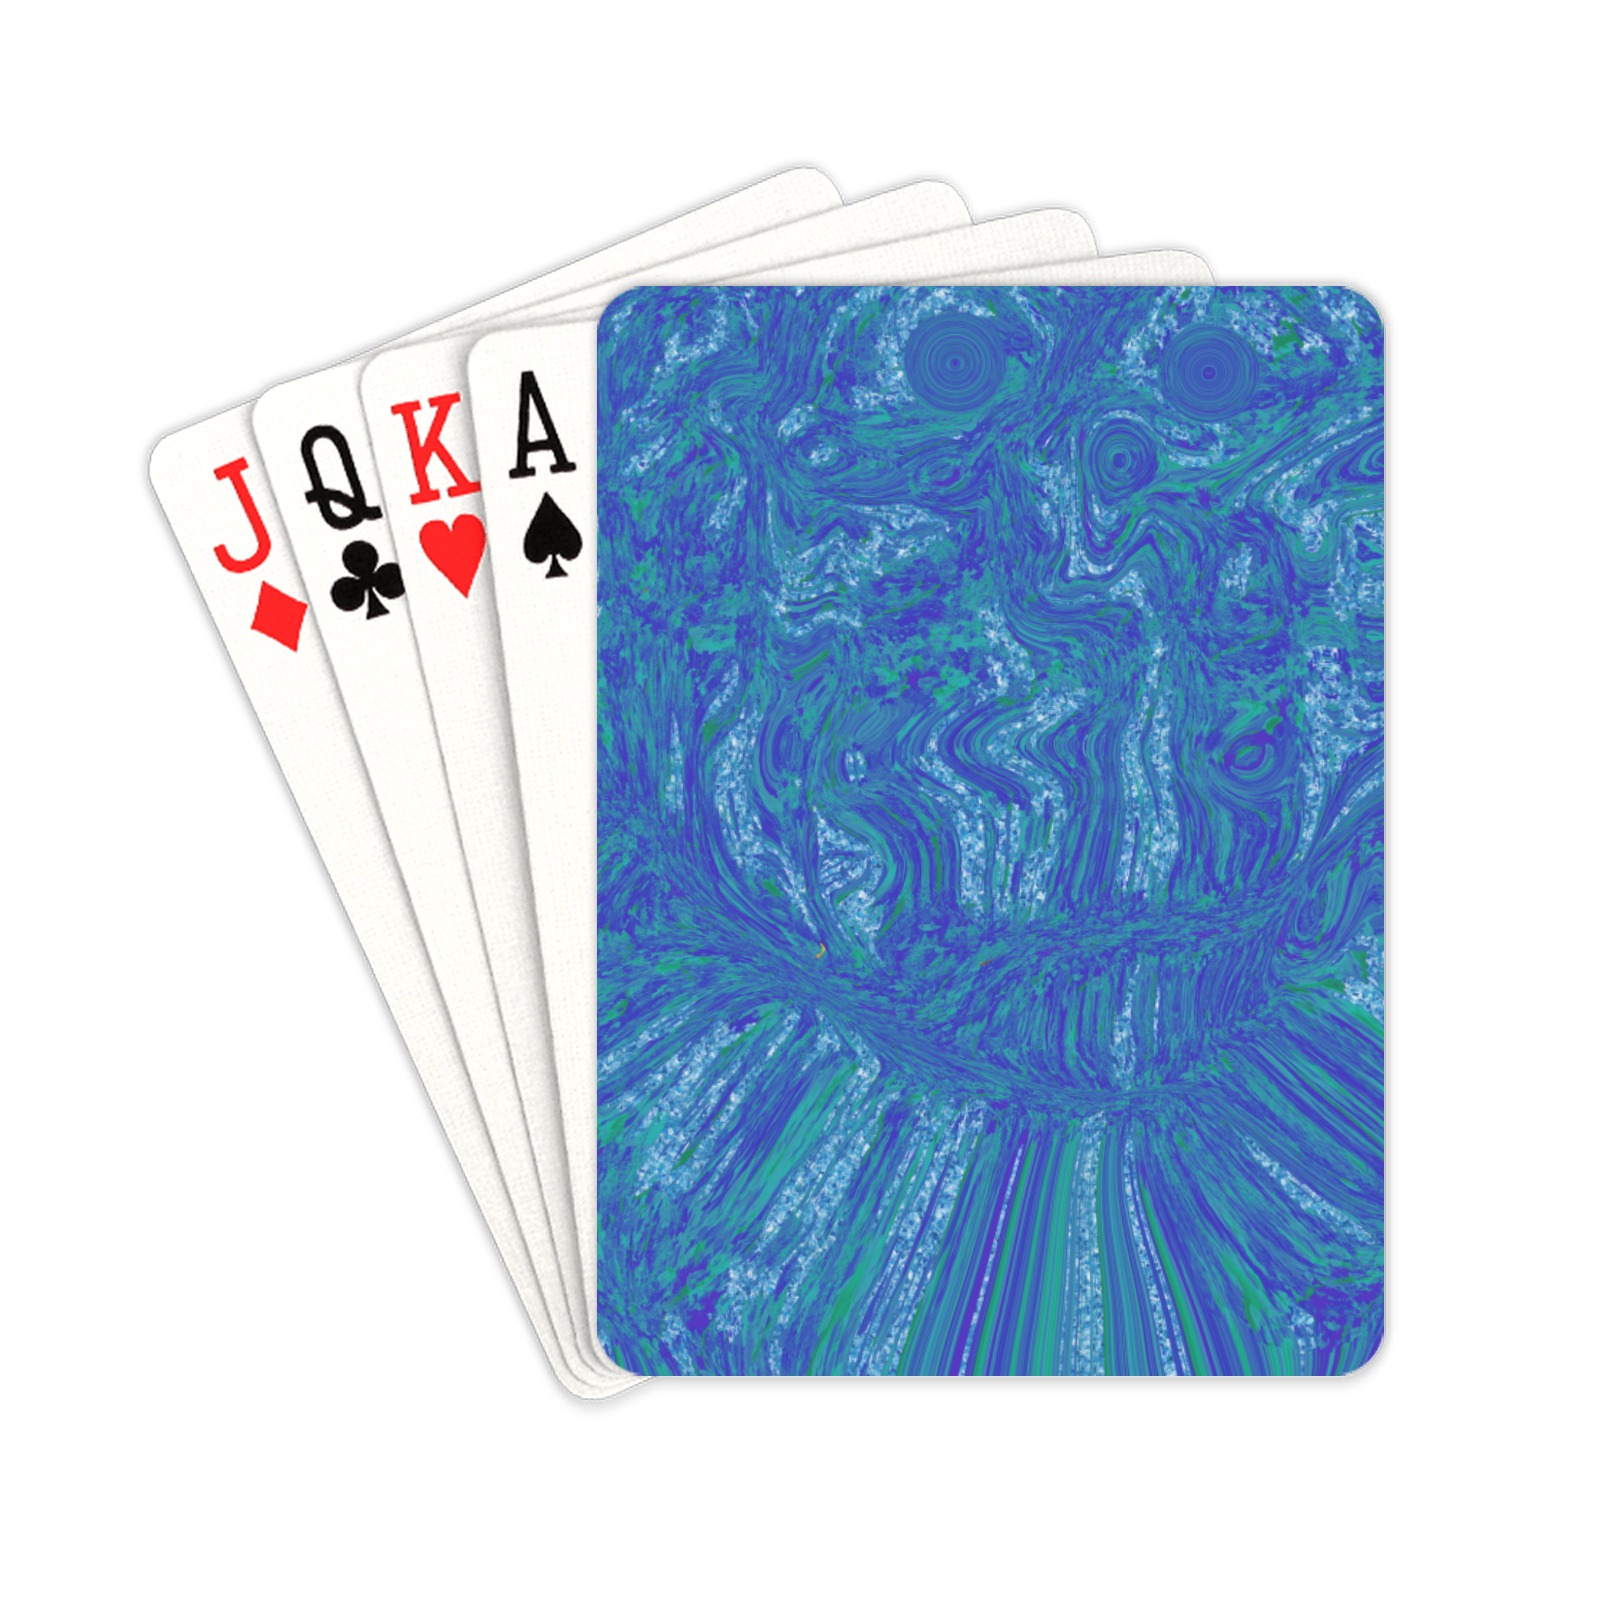 ocean storms Playing Cards 2.5"x3.5"